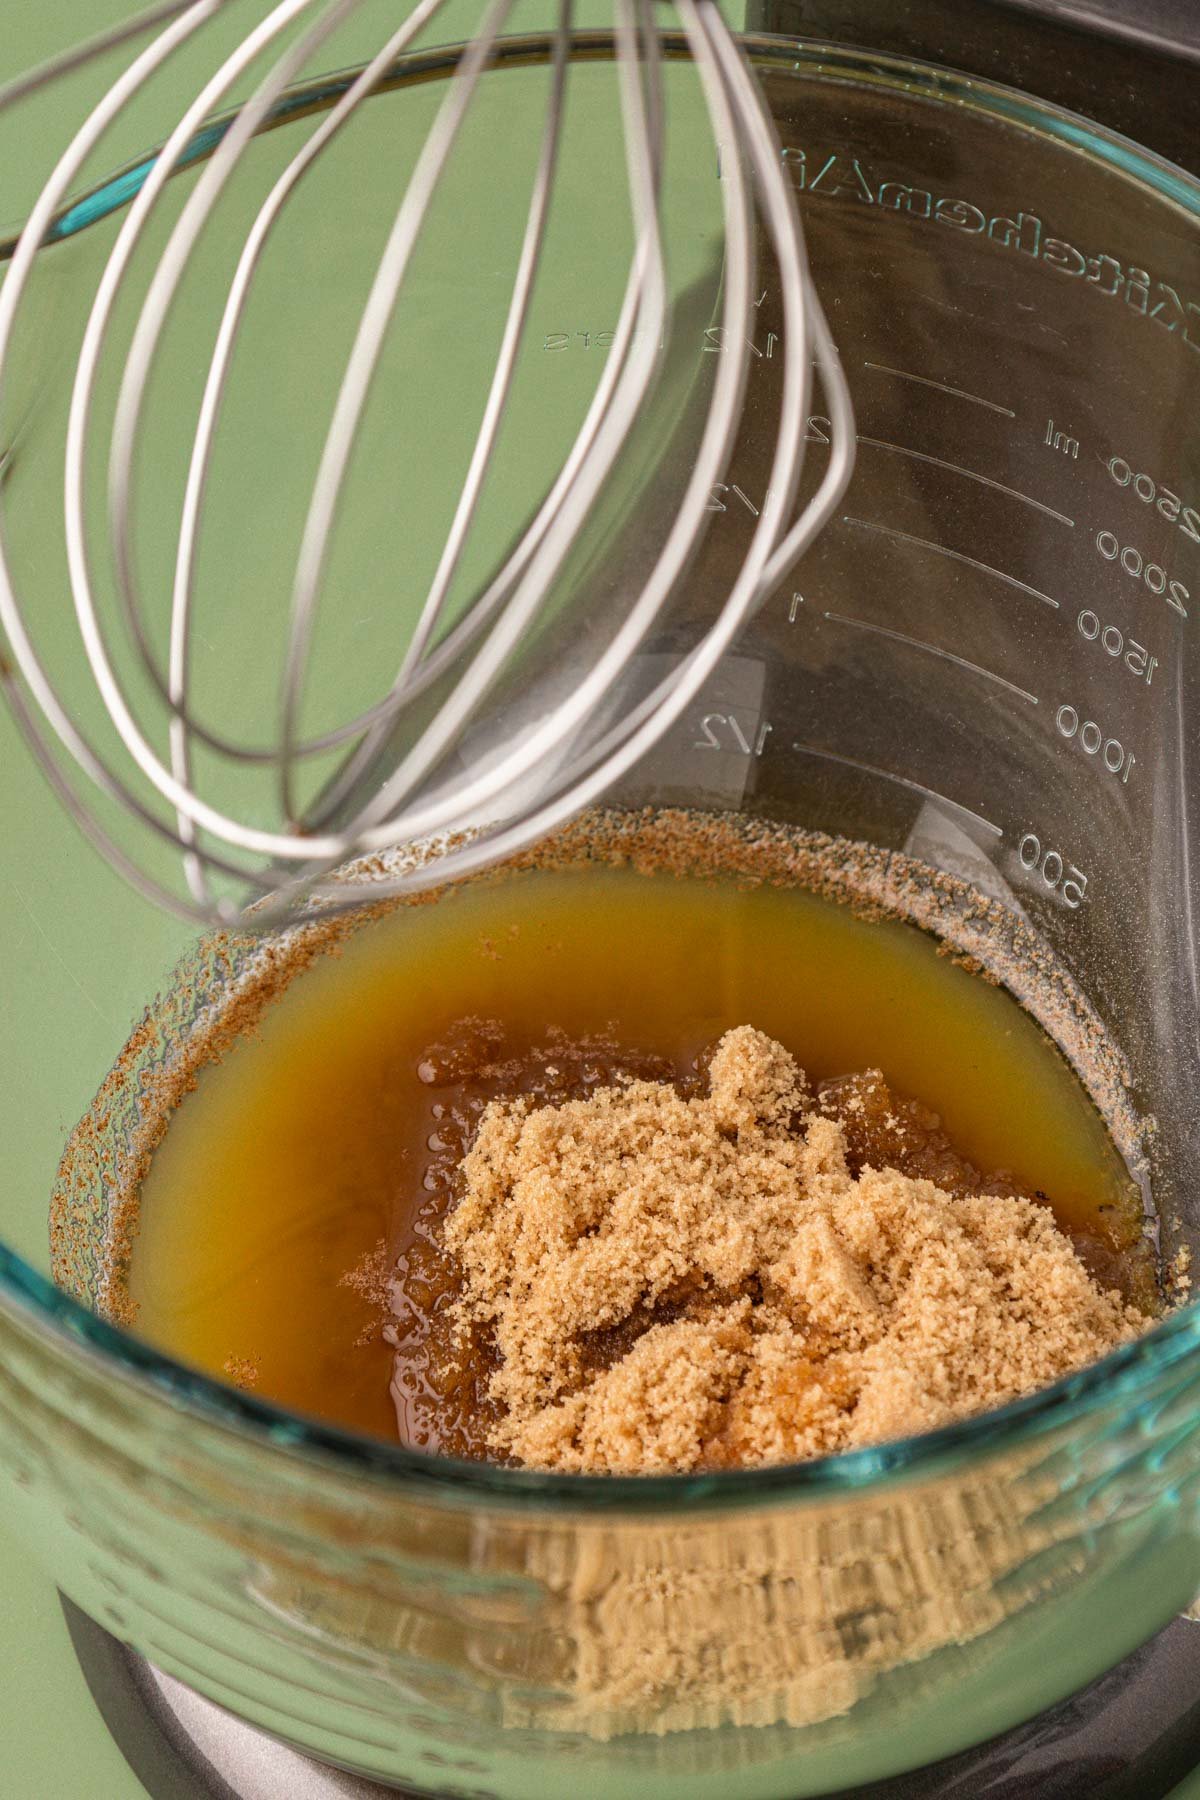 Brown sugar being added to browned butter in a glass mixing bowl.